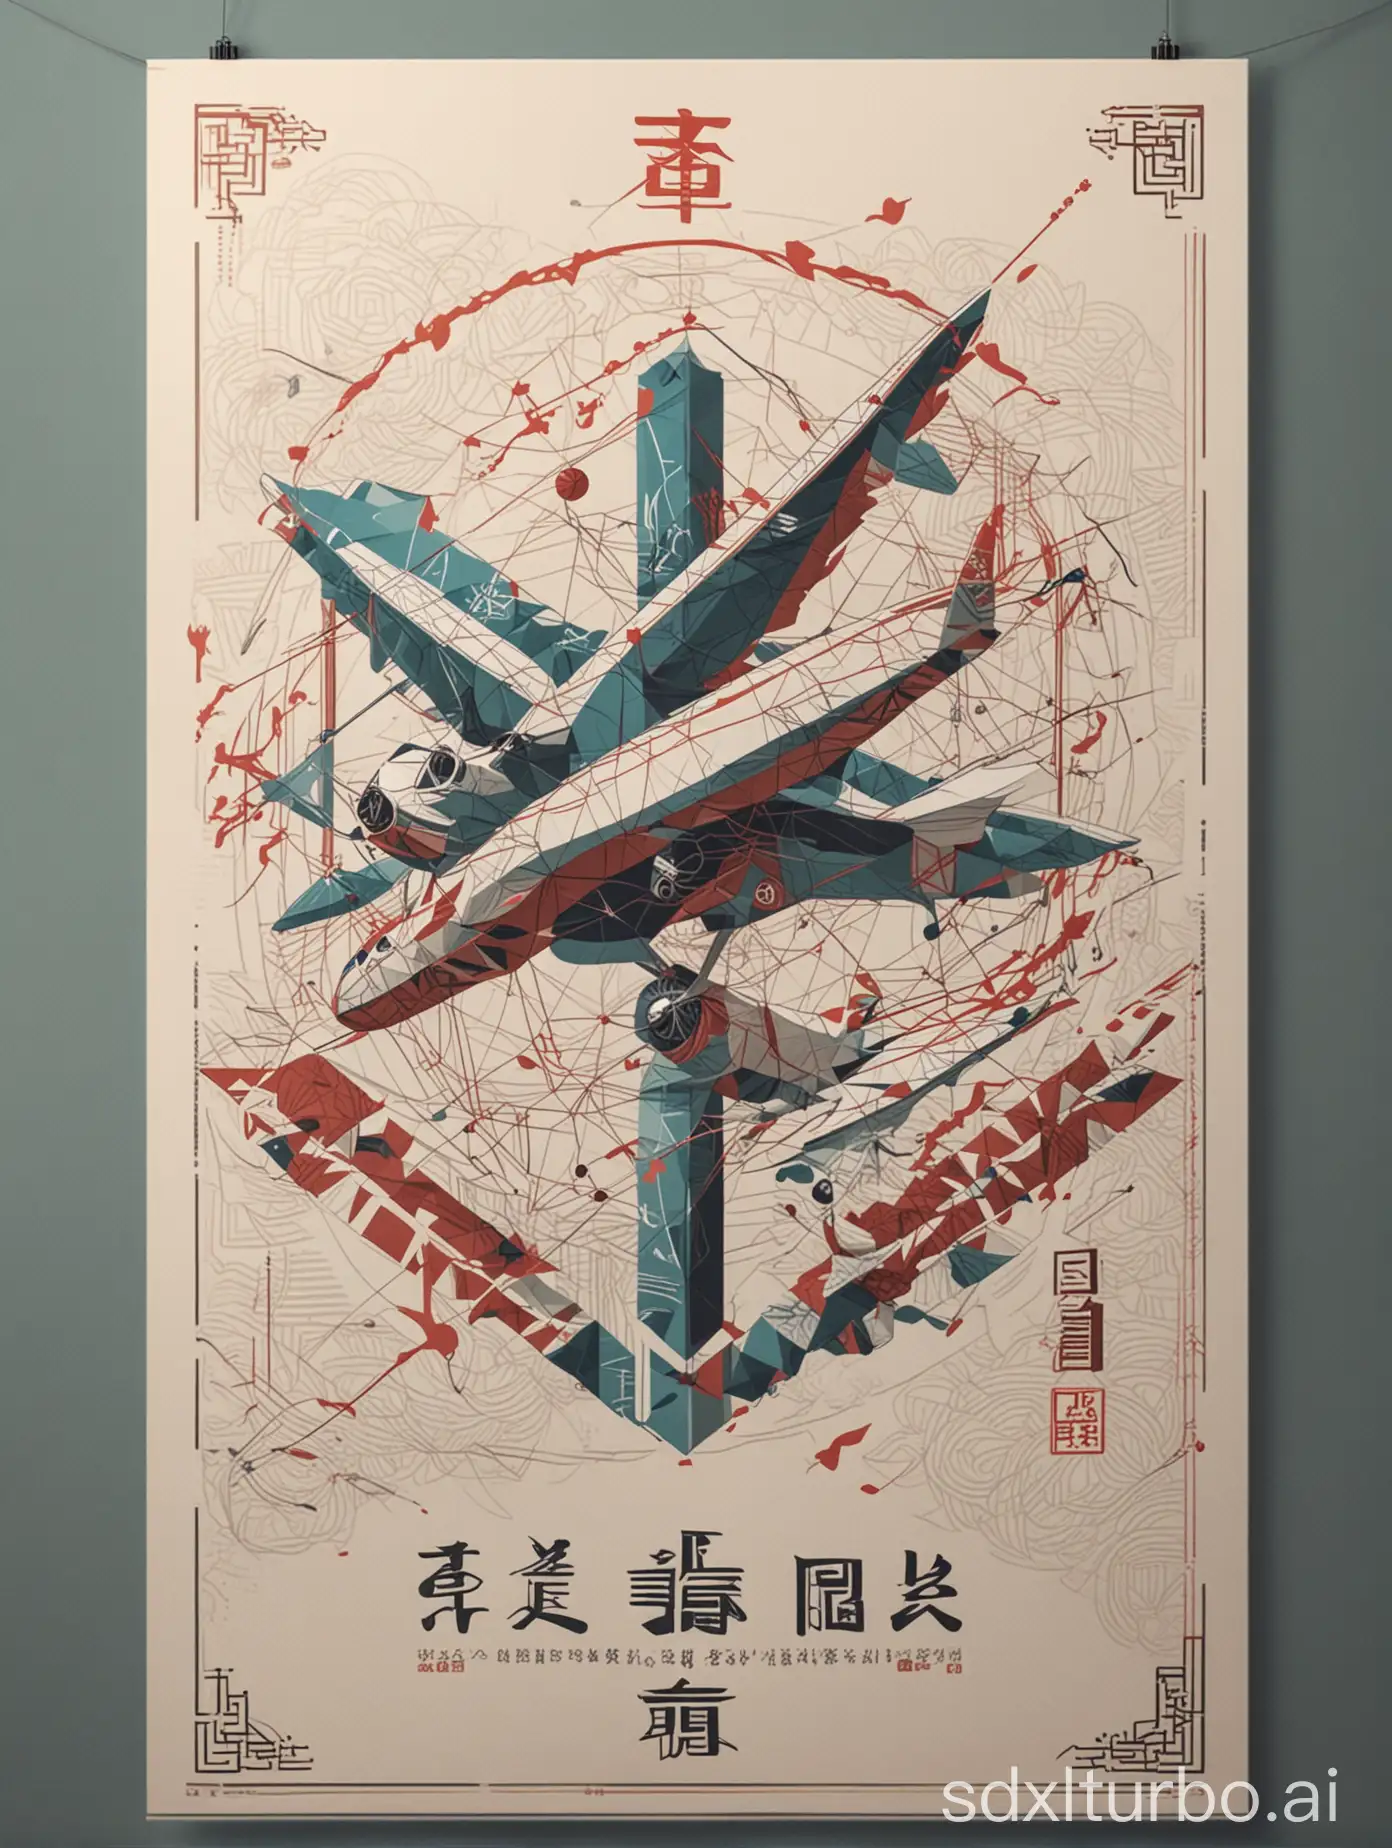 Futuristic-Chinese-Culture-Poster-with-Modern-Geometric-Lines-and-Technology-Feel